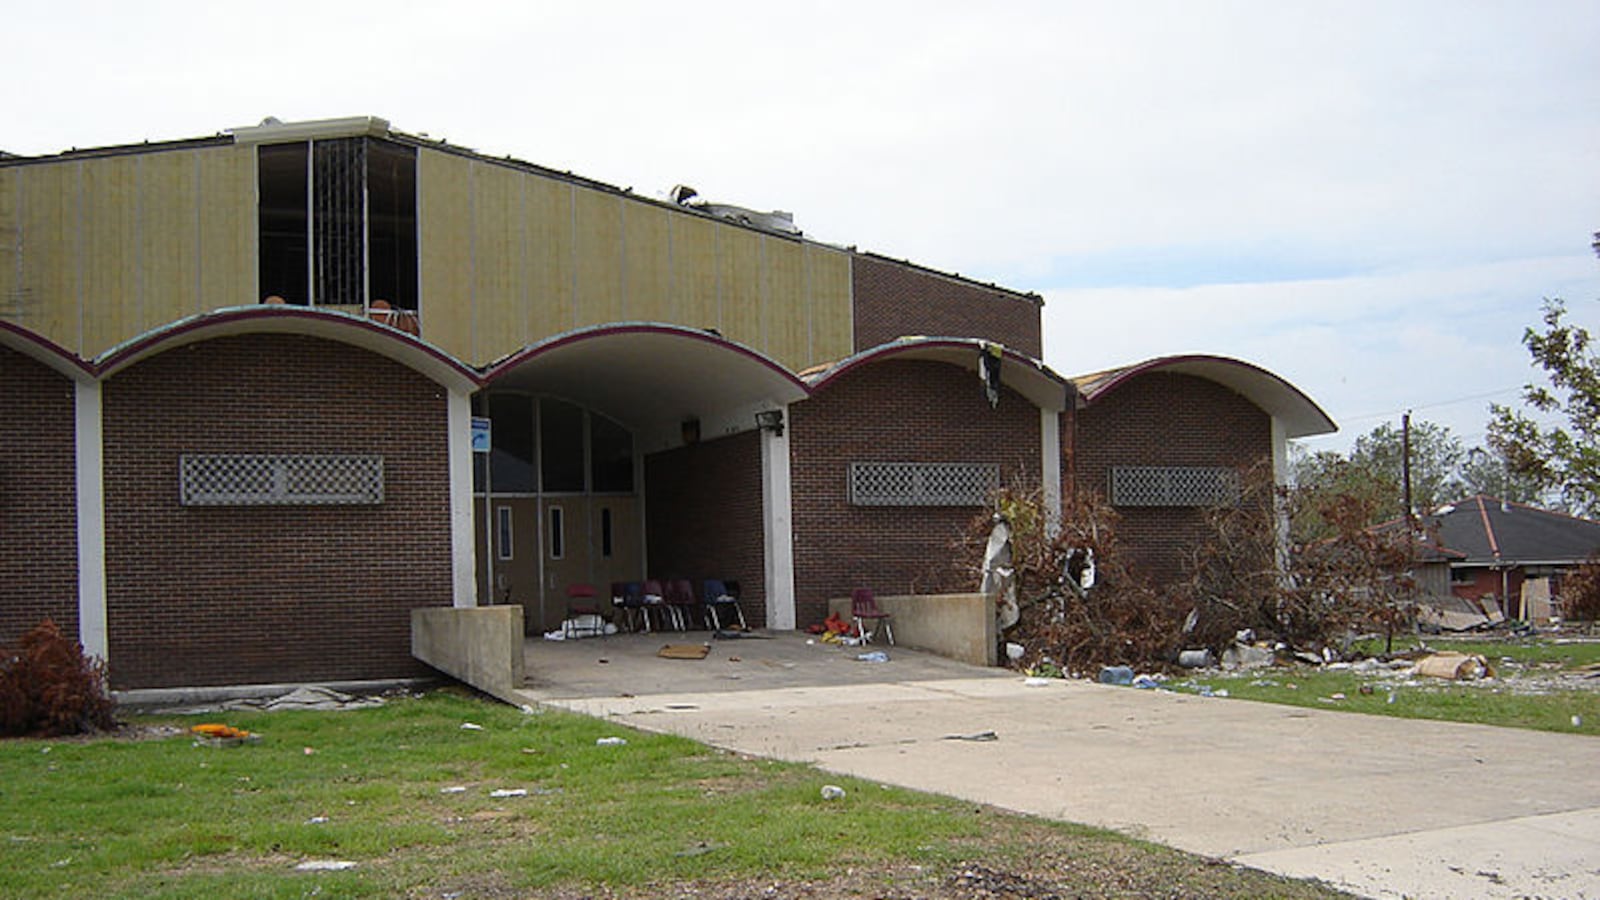 Chalmette High School in New Orleans was heavily damaged following Hurricane Katrina in 2005. Thanks in part to $53.7 million in FEMA funds, the school was repaired and underwent a state-of-art-expansion that included an athletic complex, more classrooms, a cafeteria and cultural arts center.